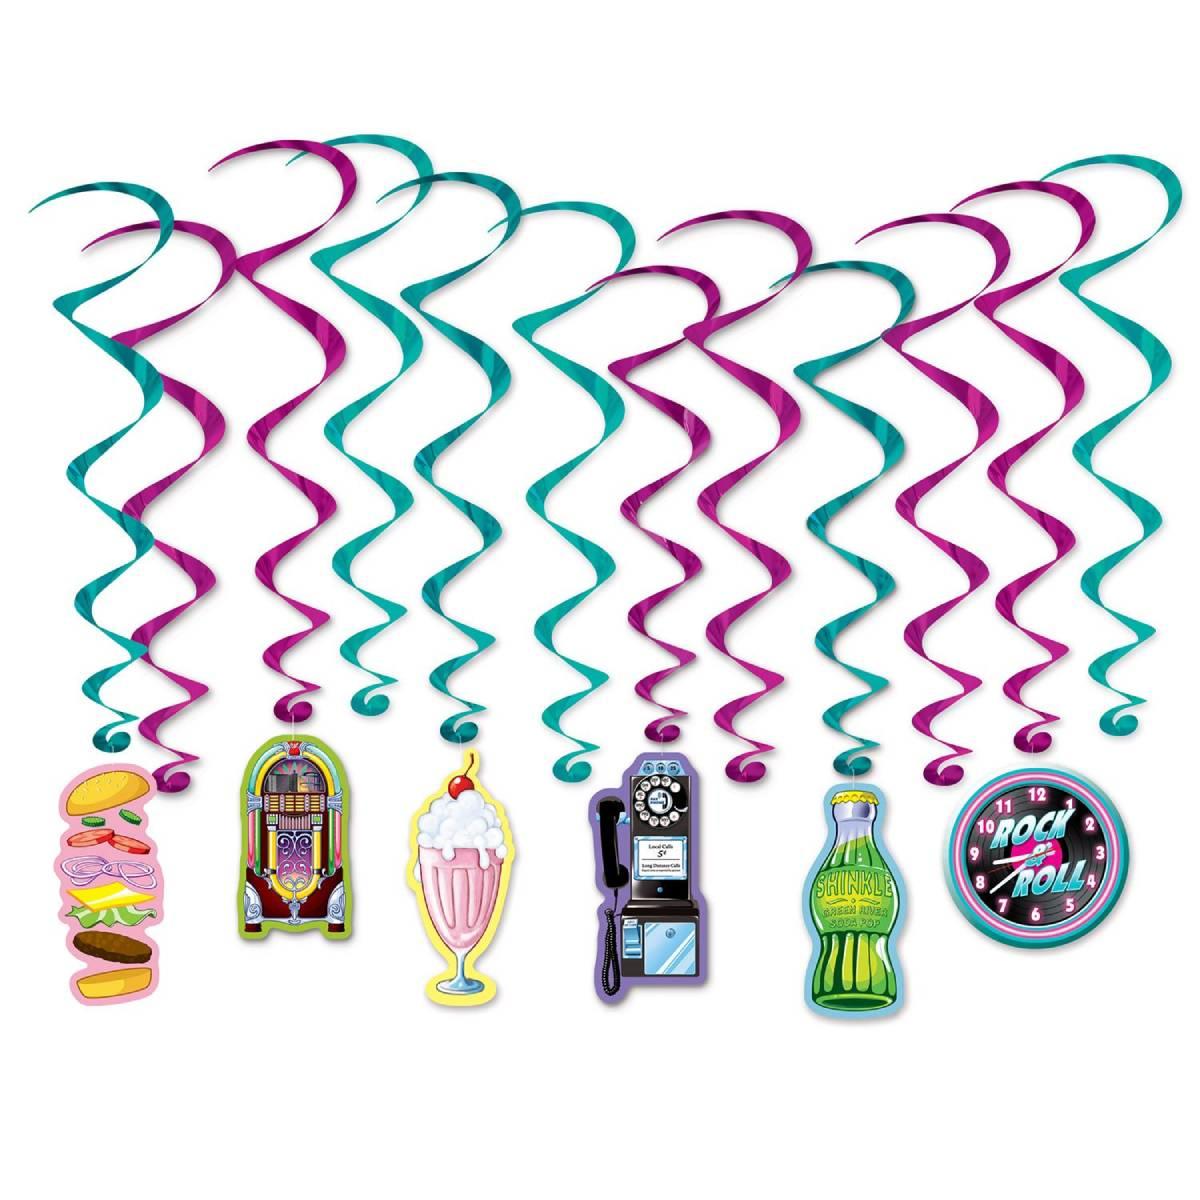 Soda Shop Hanging Whirls Decoration Pack 12pc by Beistle 53471 available here at Karnival Costumes online party shop